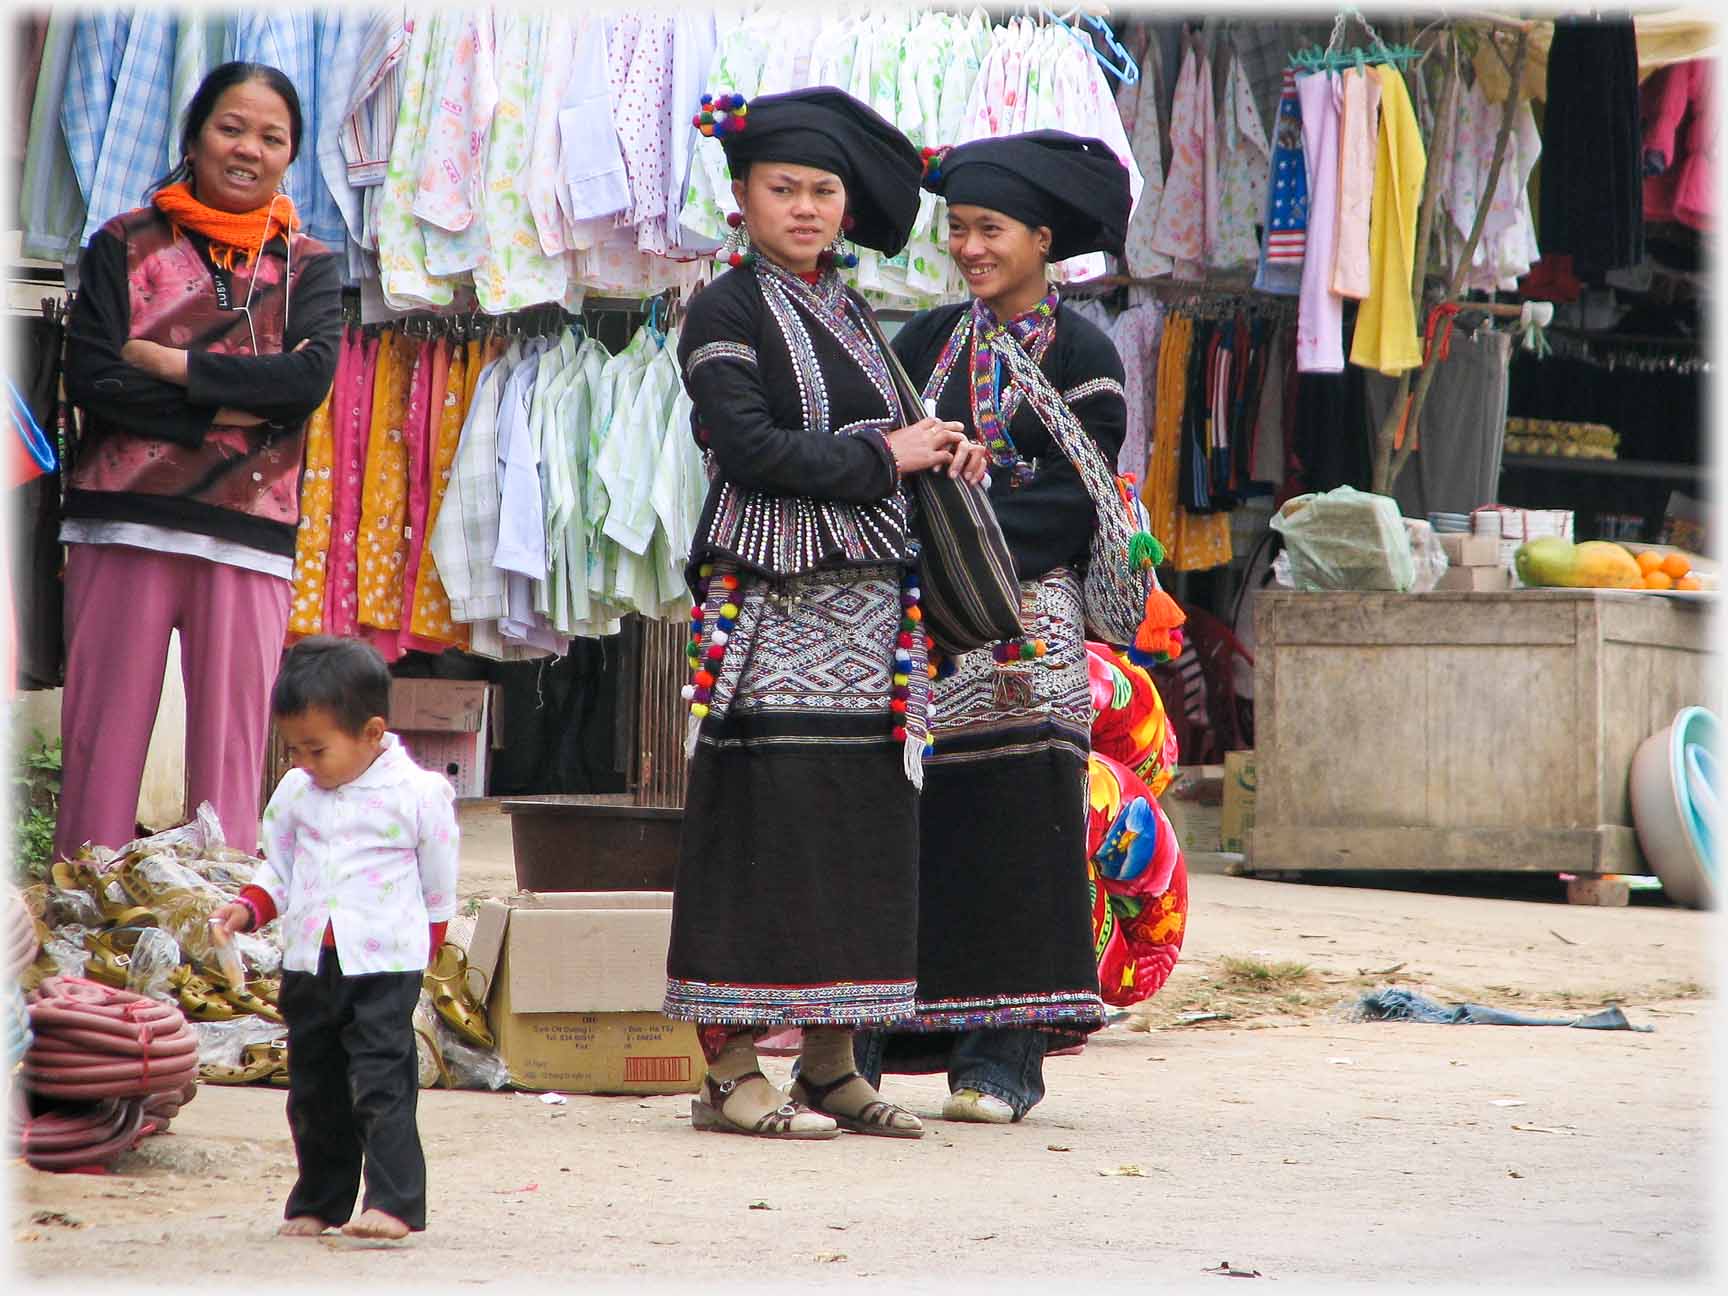 Two women in black, stall holder and small child.